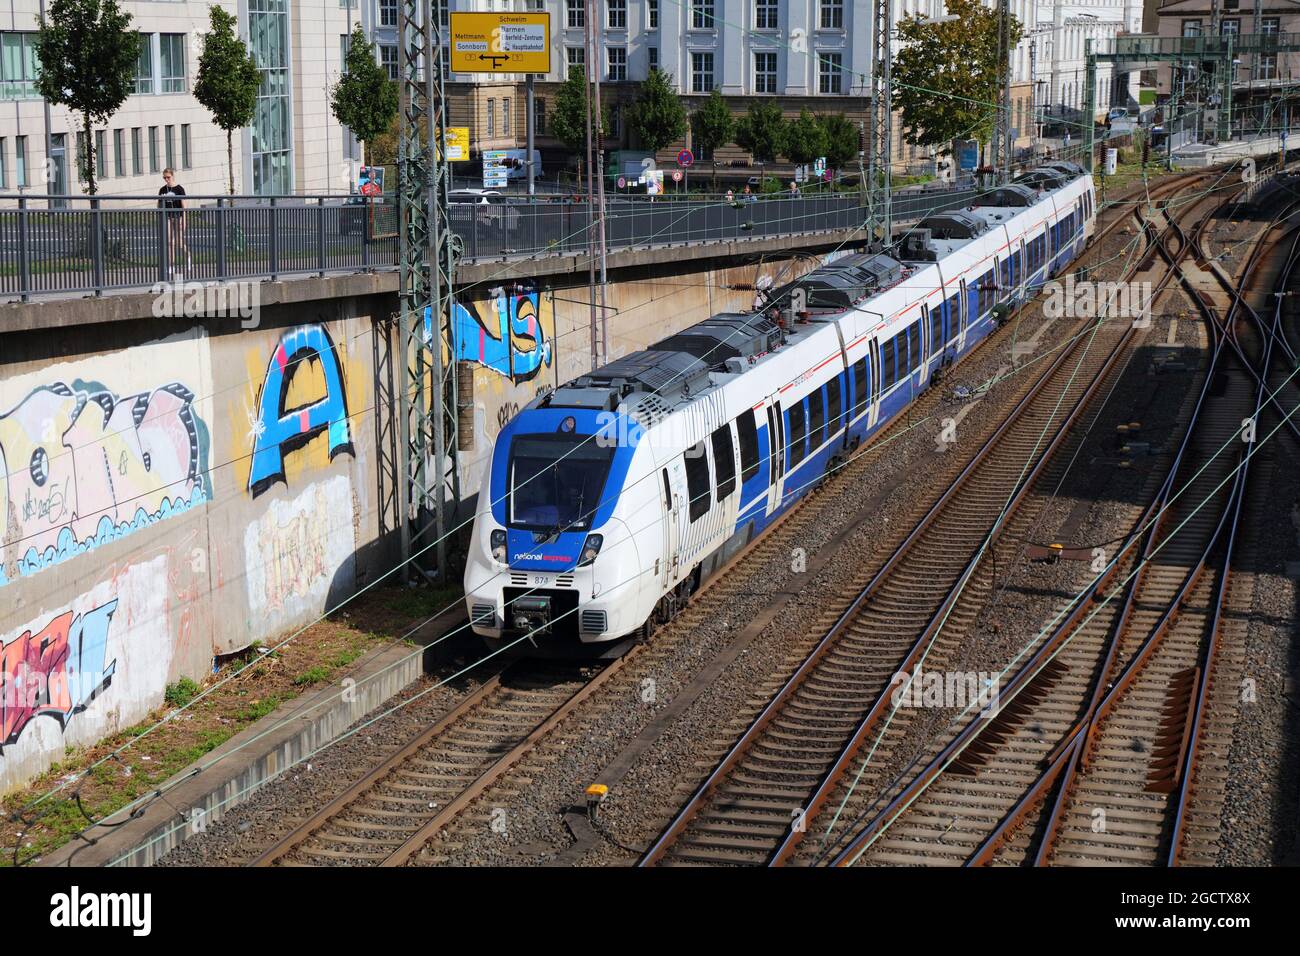 WUPPERTAL, GERMANY - SEPTEMBER 19, 2020: National Express Germany brand passenger train (model: Bombardier Talent 2) in Wuppertal. Stock Photo